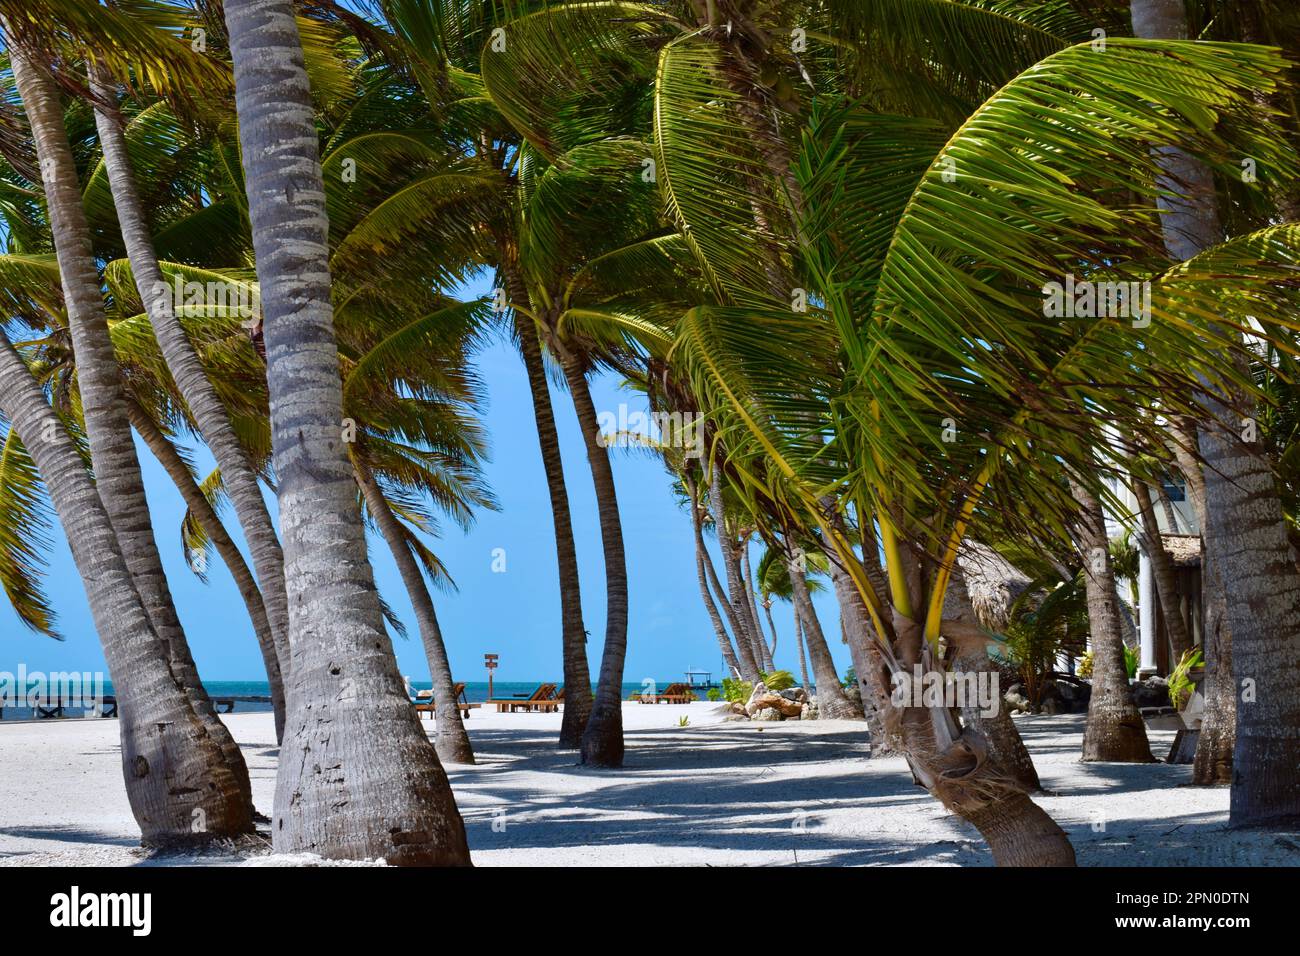 A day at the beach, under palm trees, on a sunny day in San Pedro, Ambergris Caye, Belize, Caribbean/Central America. Stock Photo